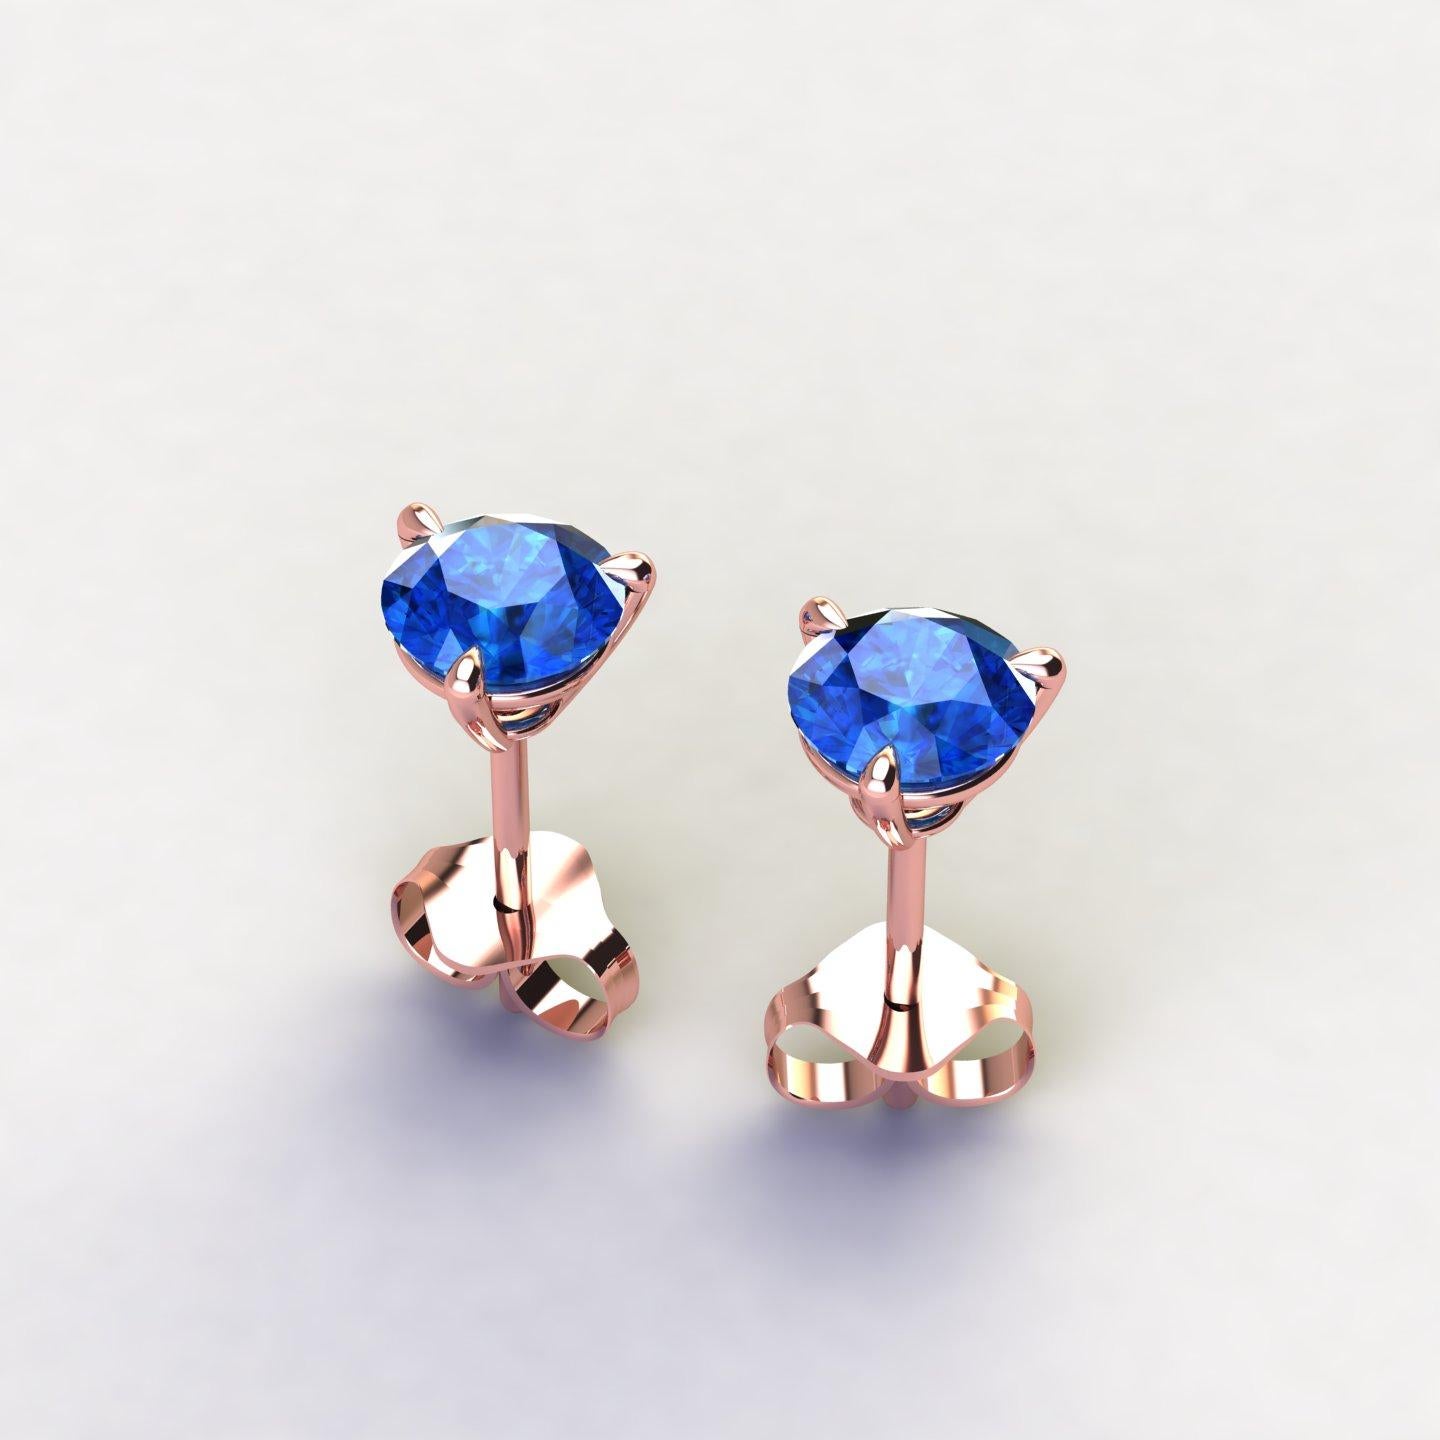 1.80 Carat Blue Sapphires Martini Ear Studs 18K Rose Gold, made in New York City with the best Italian craftsmanship,

Perfect gift for any woman and every age, easy to wear from the office to a special evening out.

